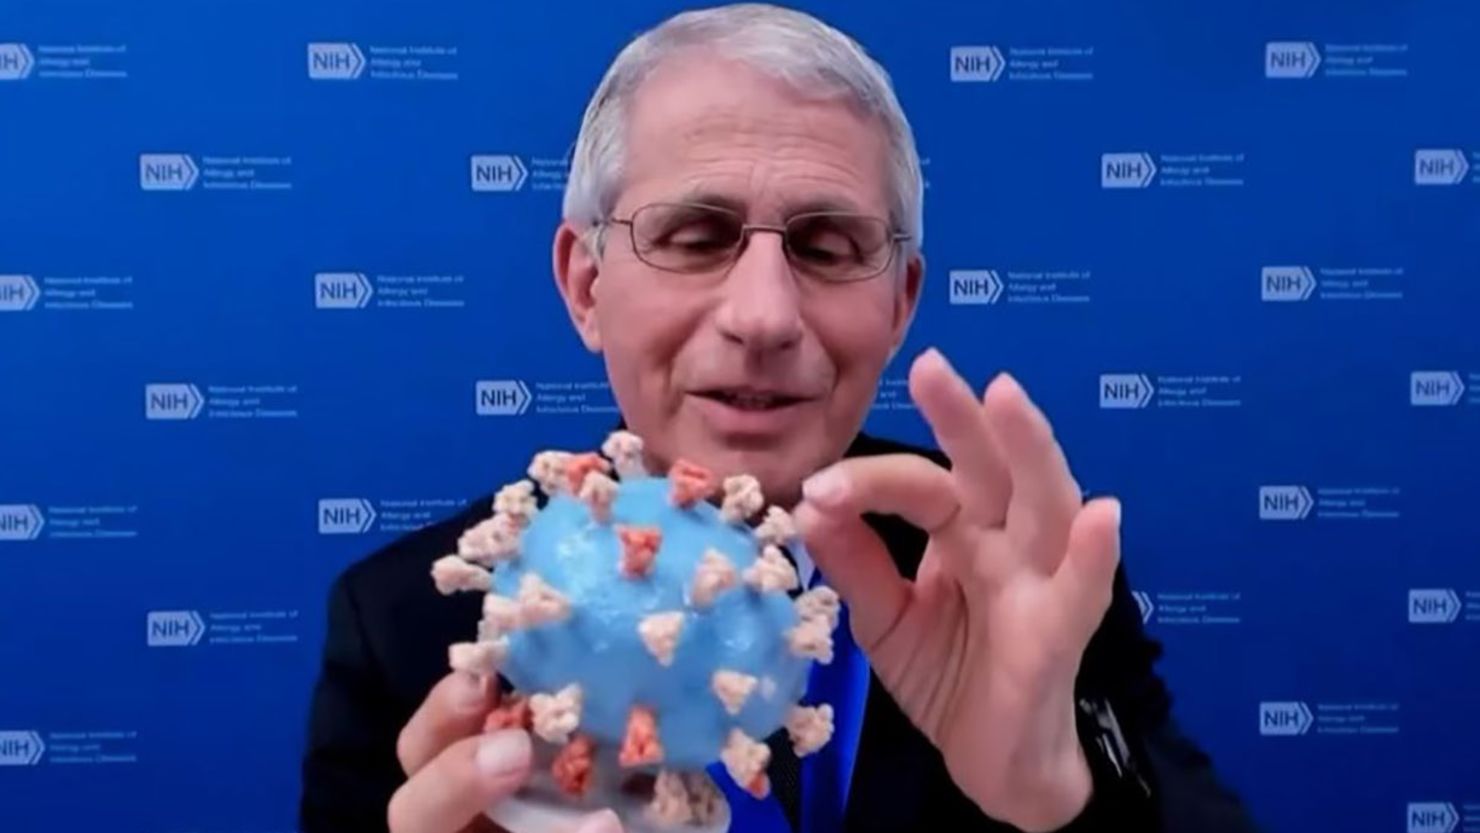 Dr. Anthony Fauci has donated his 3D model of the coronavirus to the national medicine and science collections at the Smithsonian's National Museum of American History.